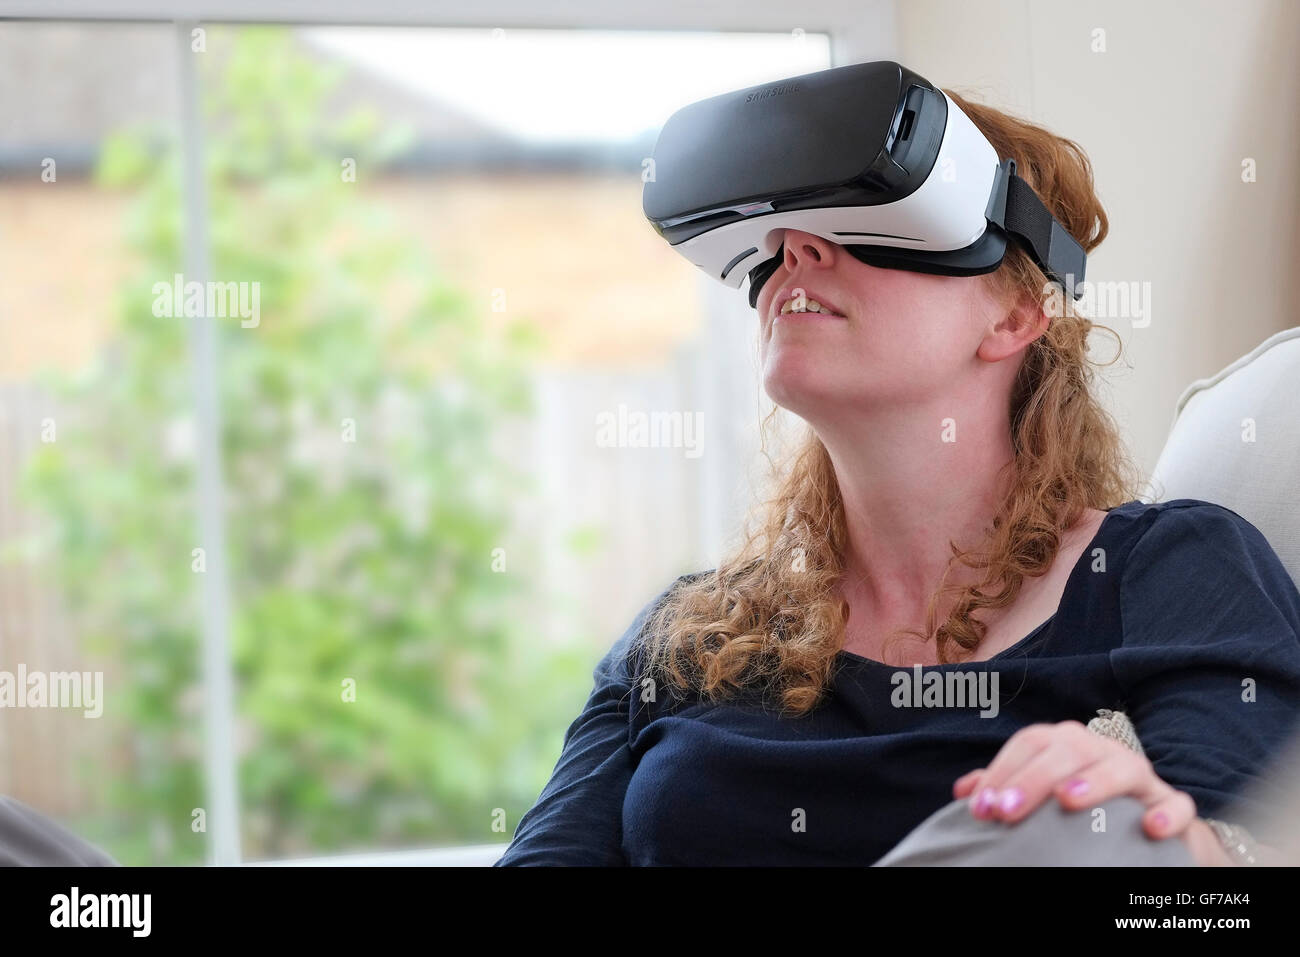 virtual reality headset worn by female person Stock Photo